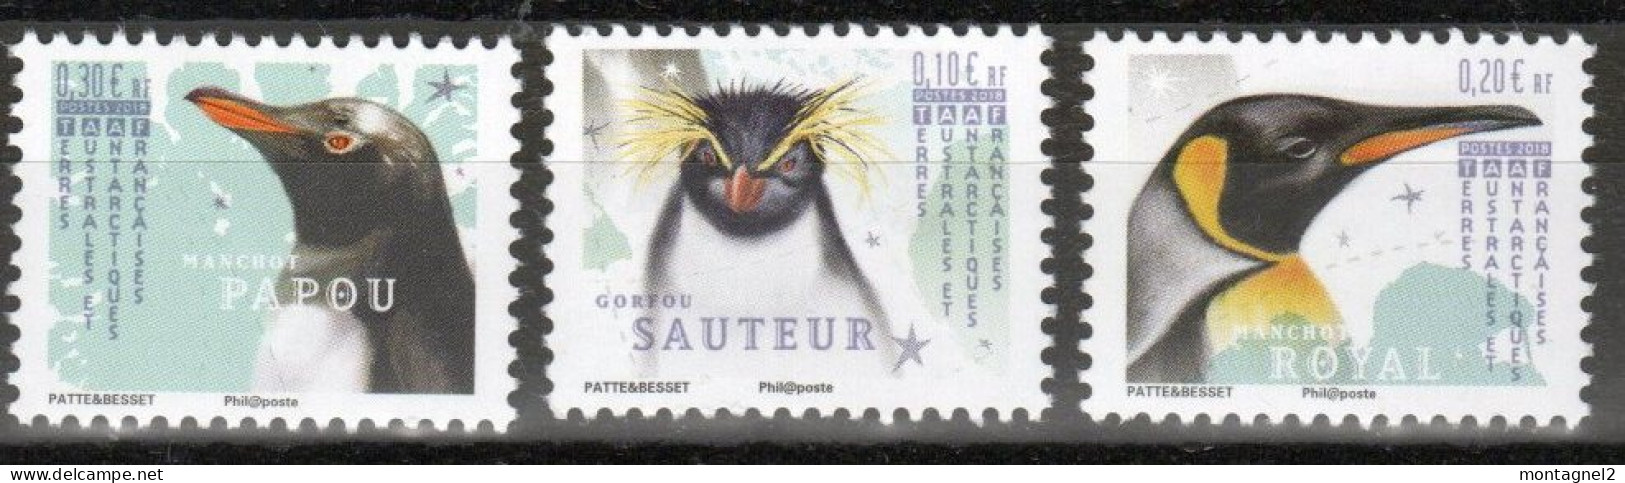 Timbre Des TAAF  N° 871 872 873 Neuf ** - Pinguine